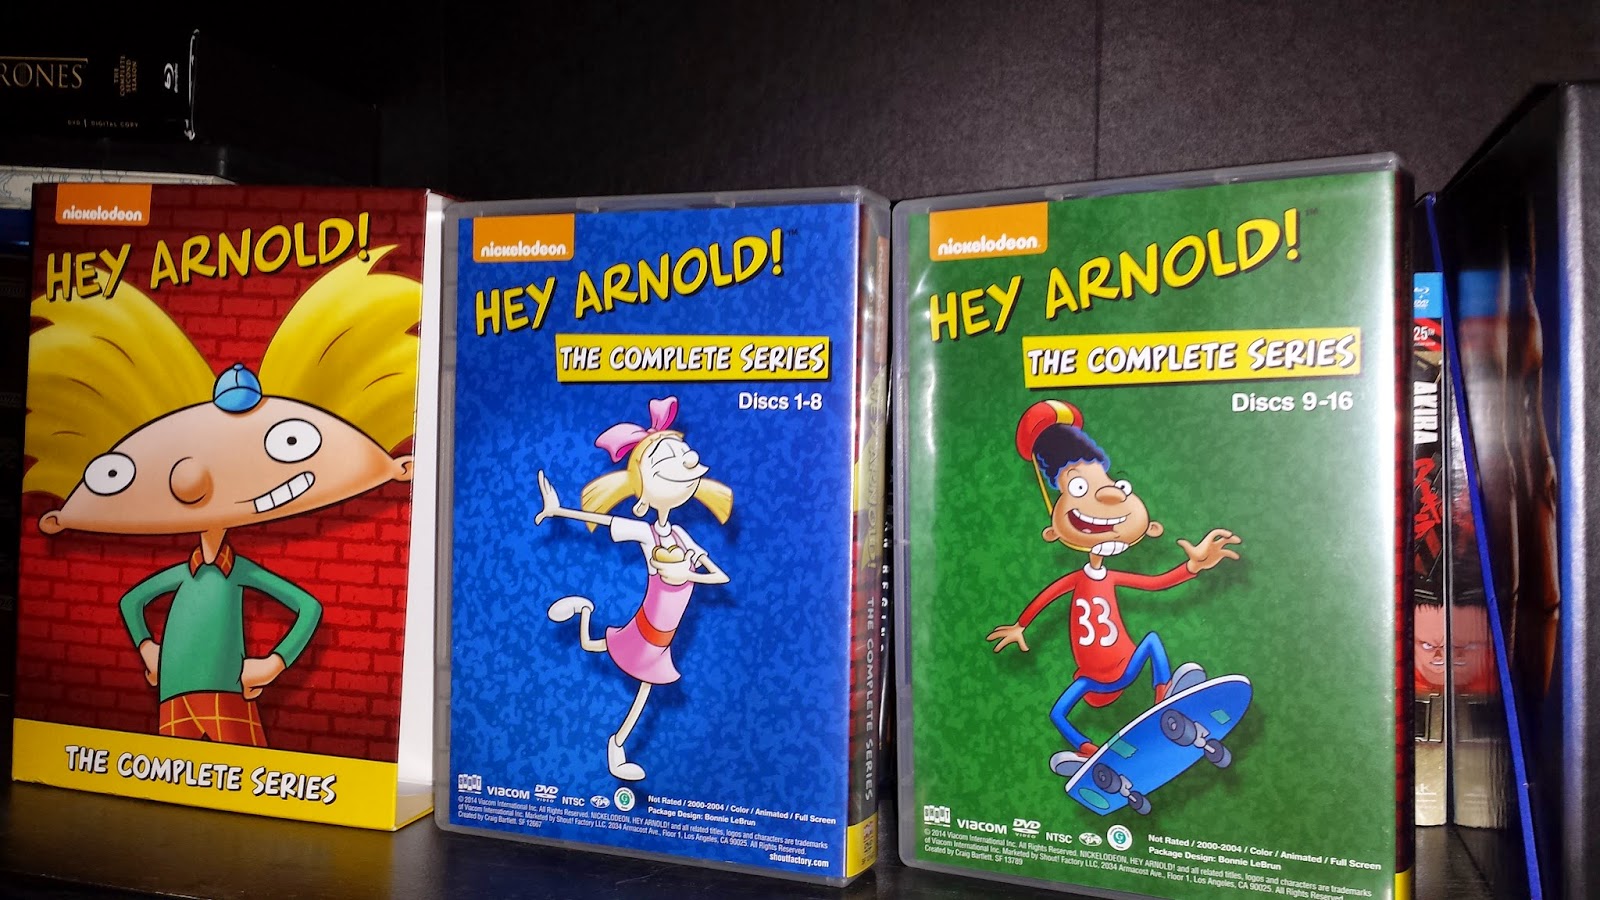 Hey Arnold The Complete Series.